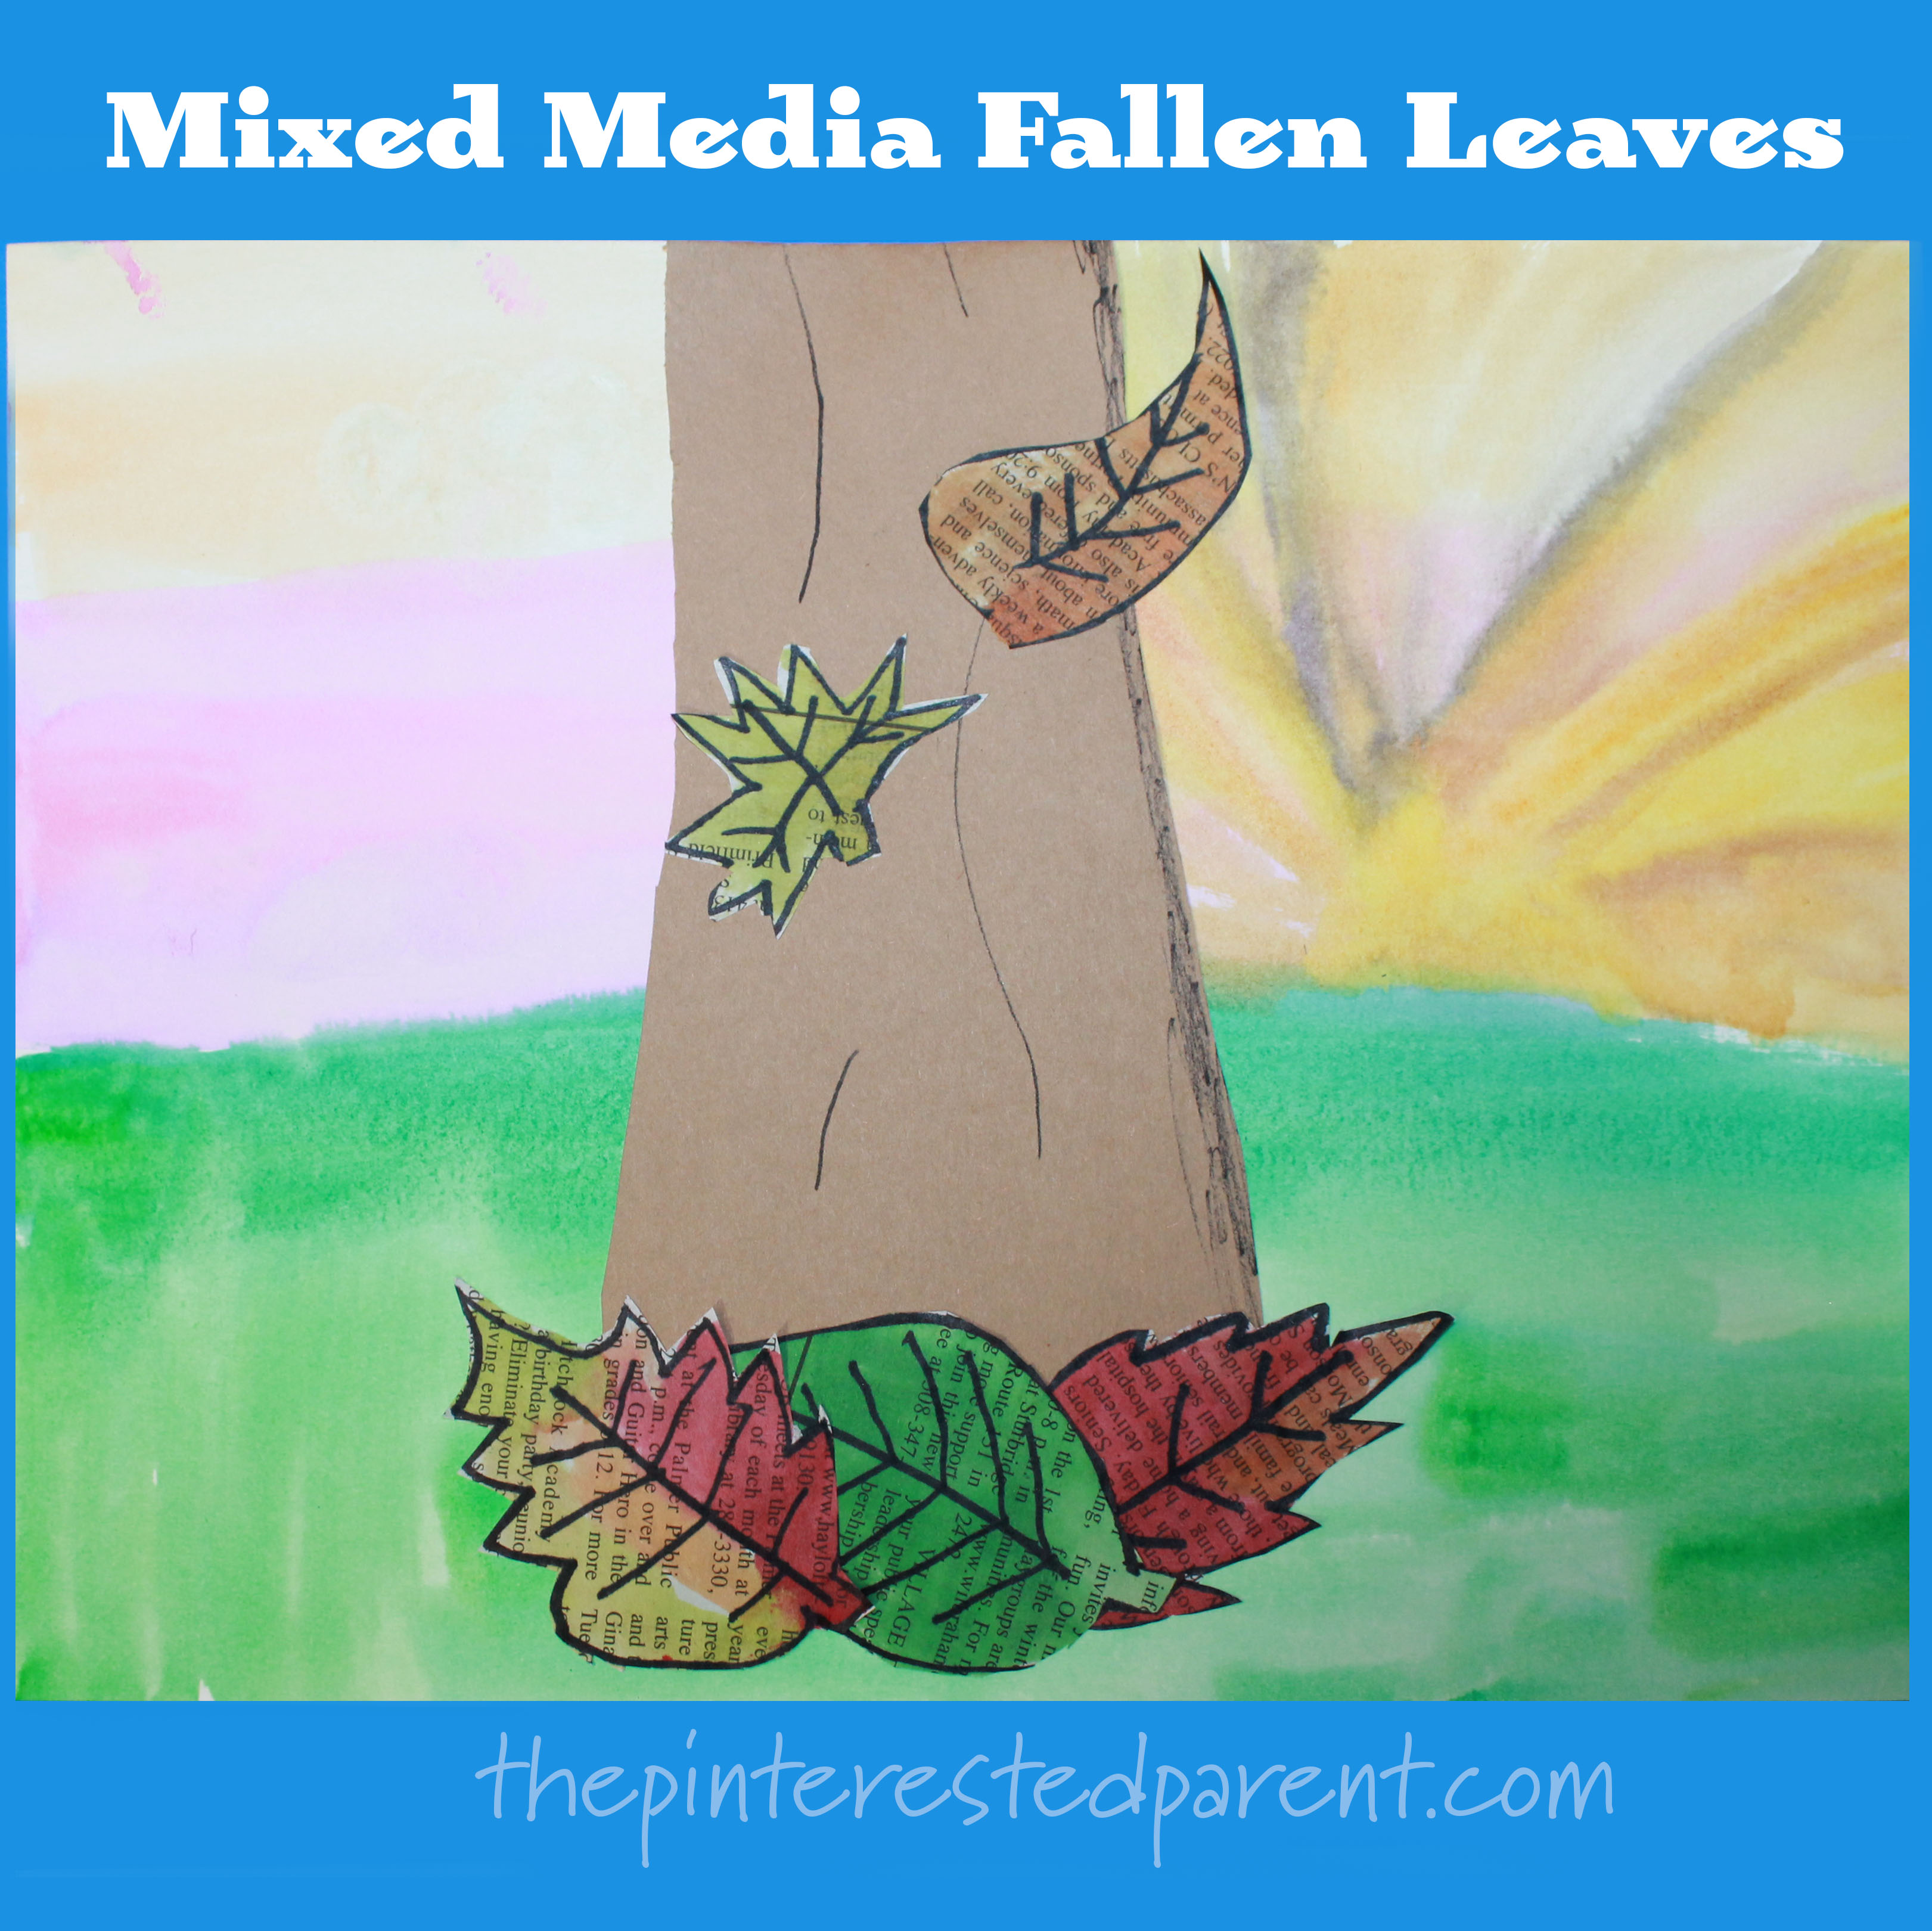 Mixed Media Fallen Leaves Arts & Crafts Project - Use newspaper, watercolors and other media to make this lovely autumn / fall art project . Kids artwork # falling leaves